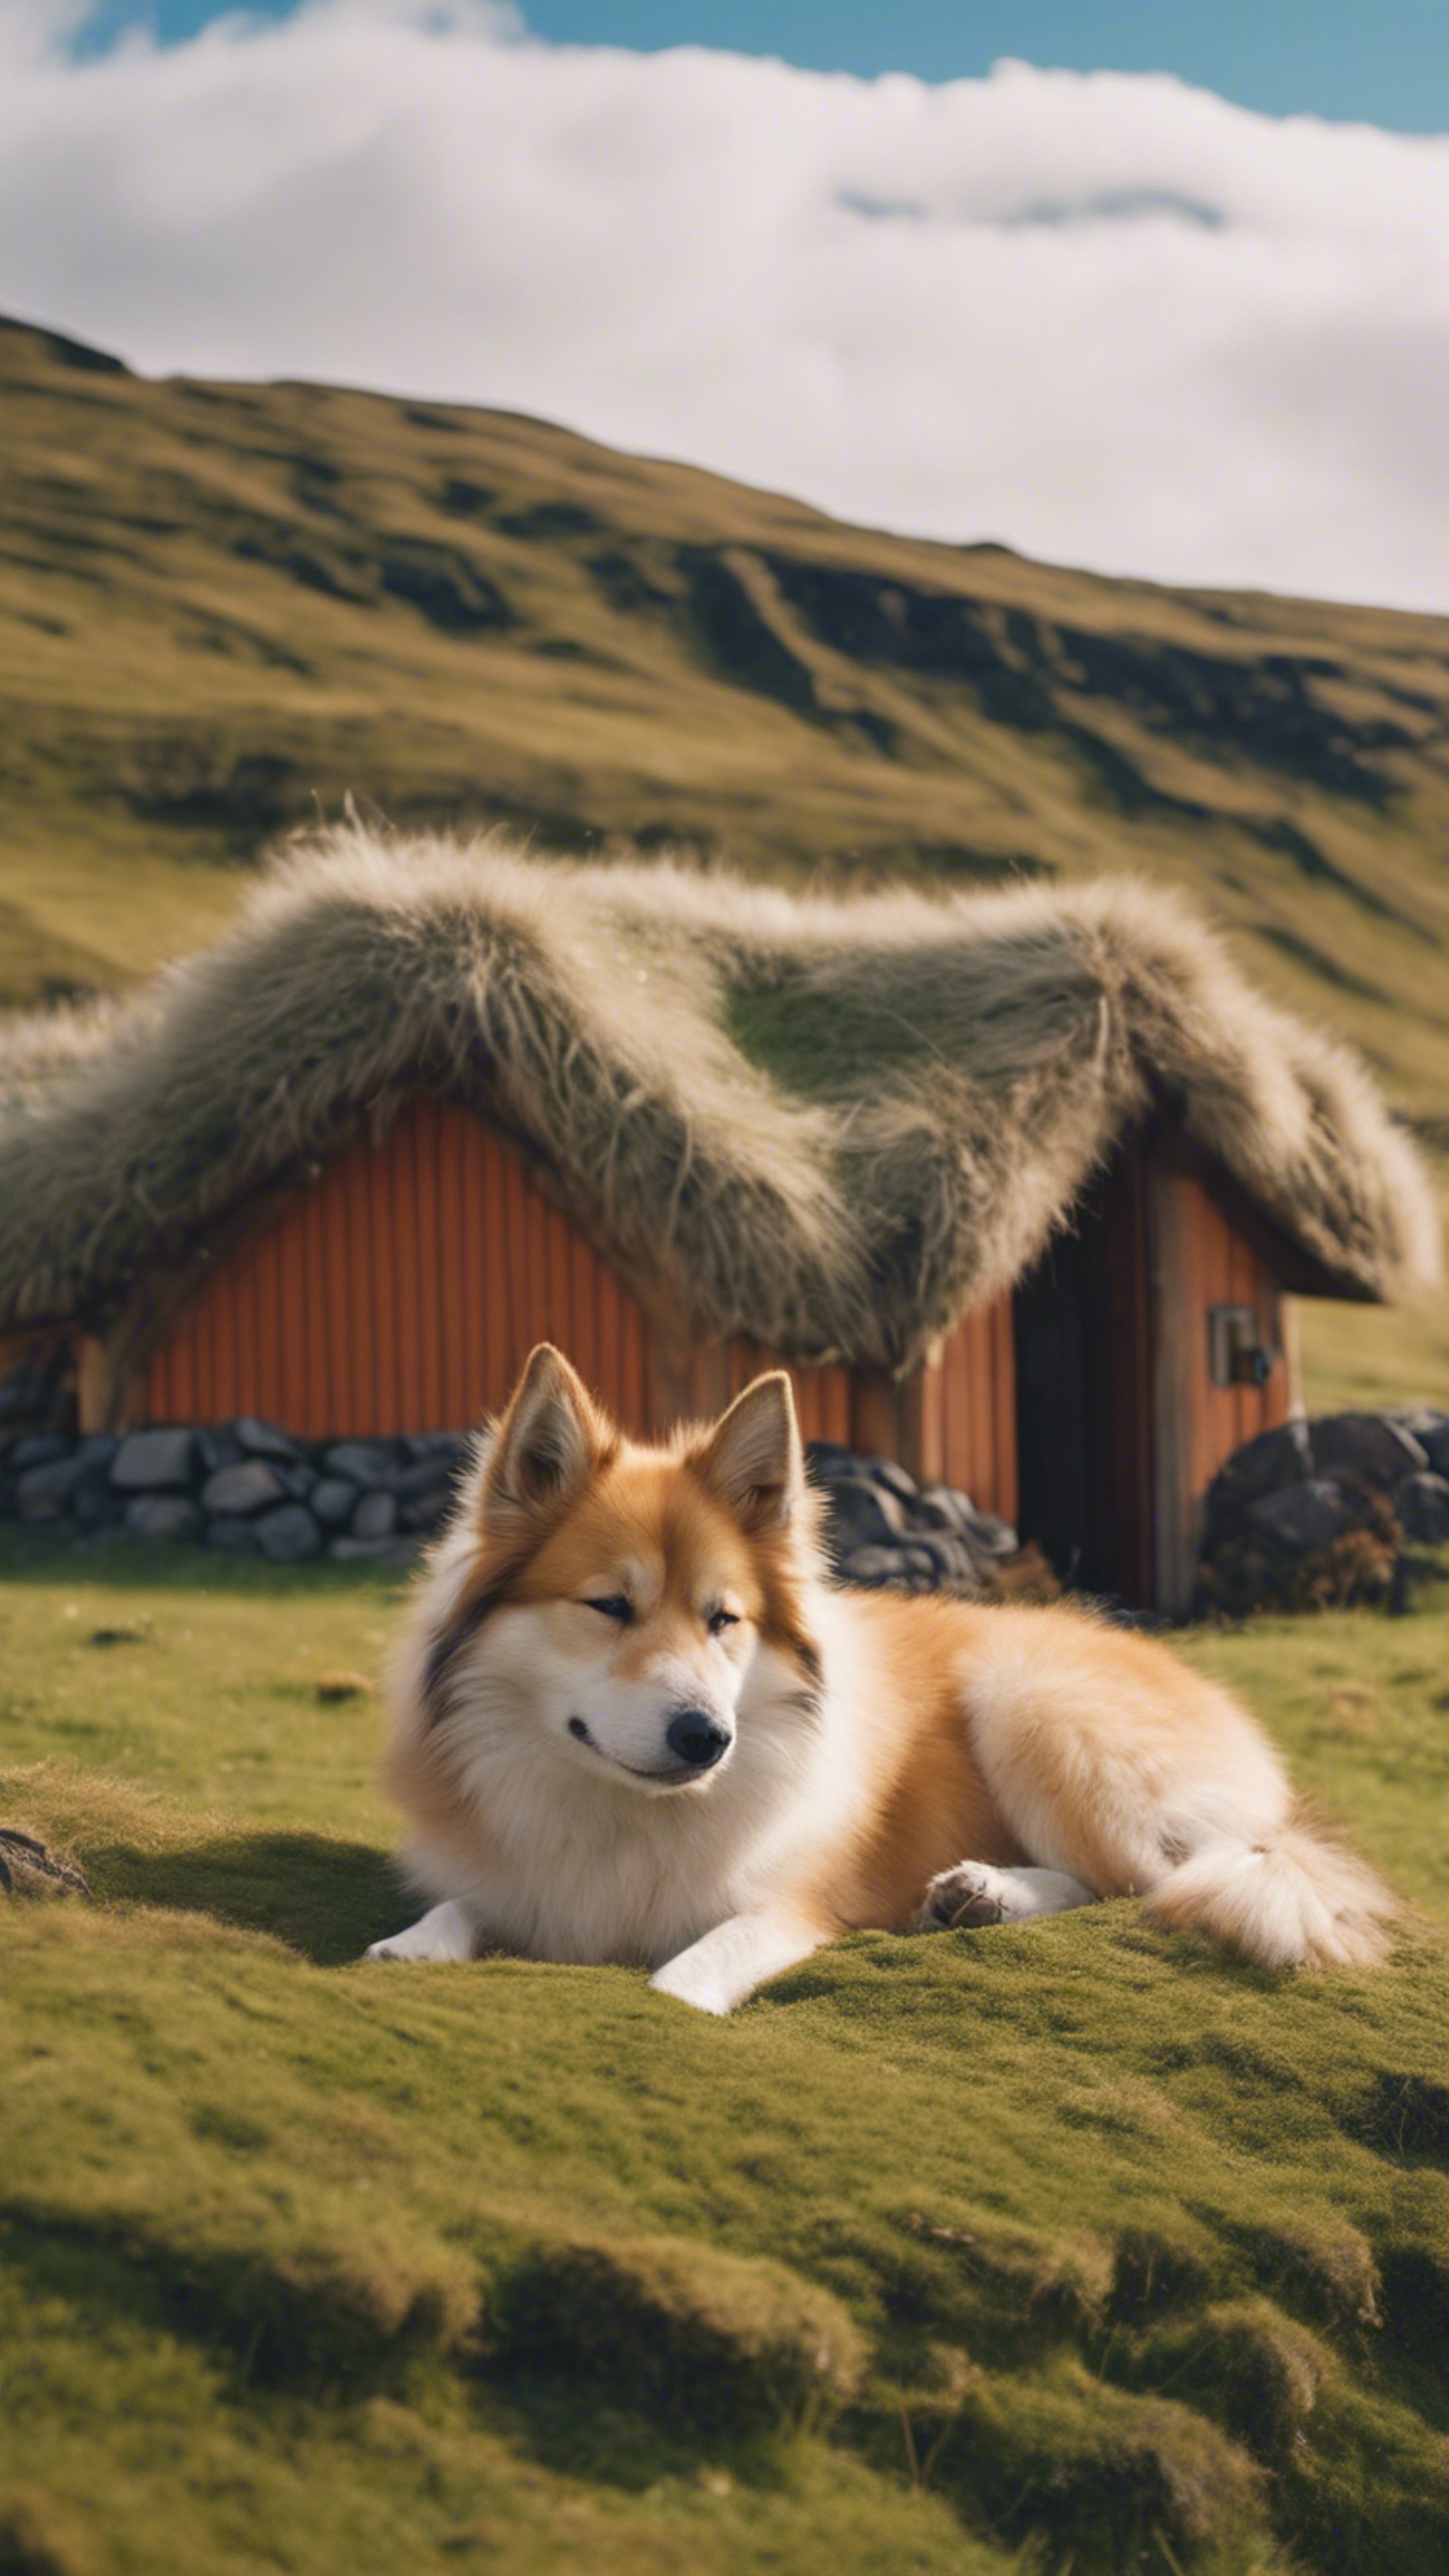 An Icelandic Sheepdog sleeping by a traditional turf house, the stunning Icelandic landscape spread out behind.壁紙[db9120f49f1140f69e54]